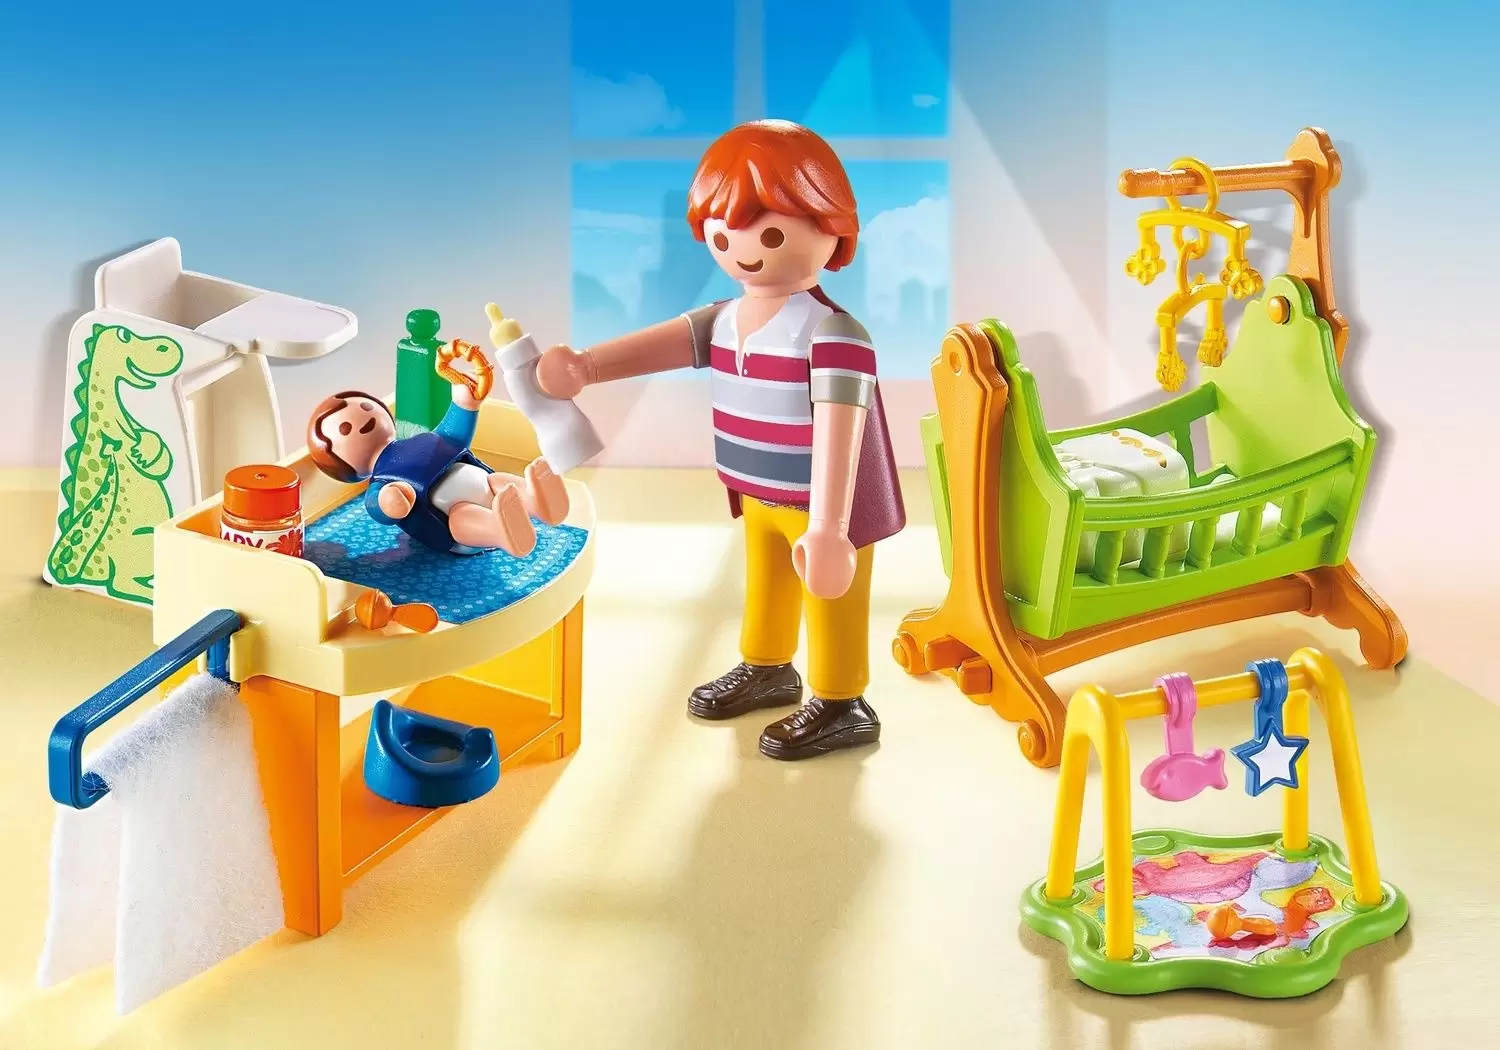 Playmobil Houses and Furniture - Baby Room with Cradle